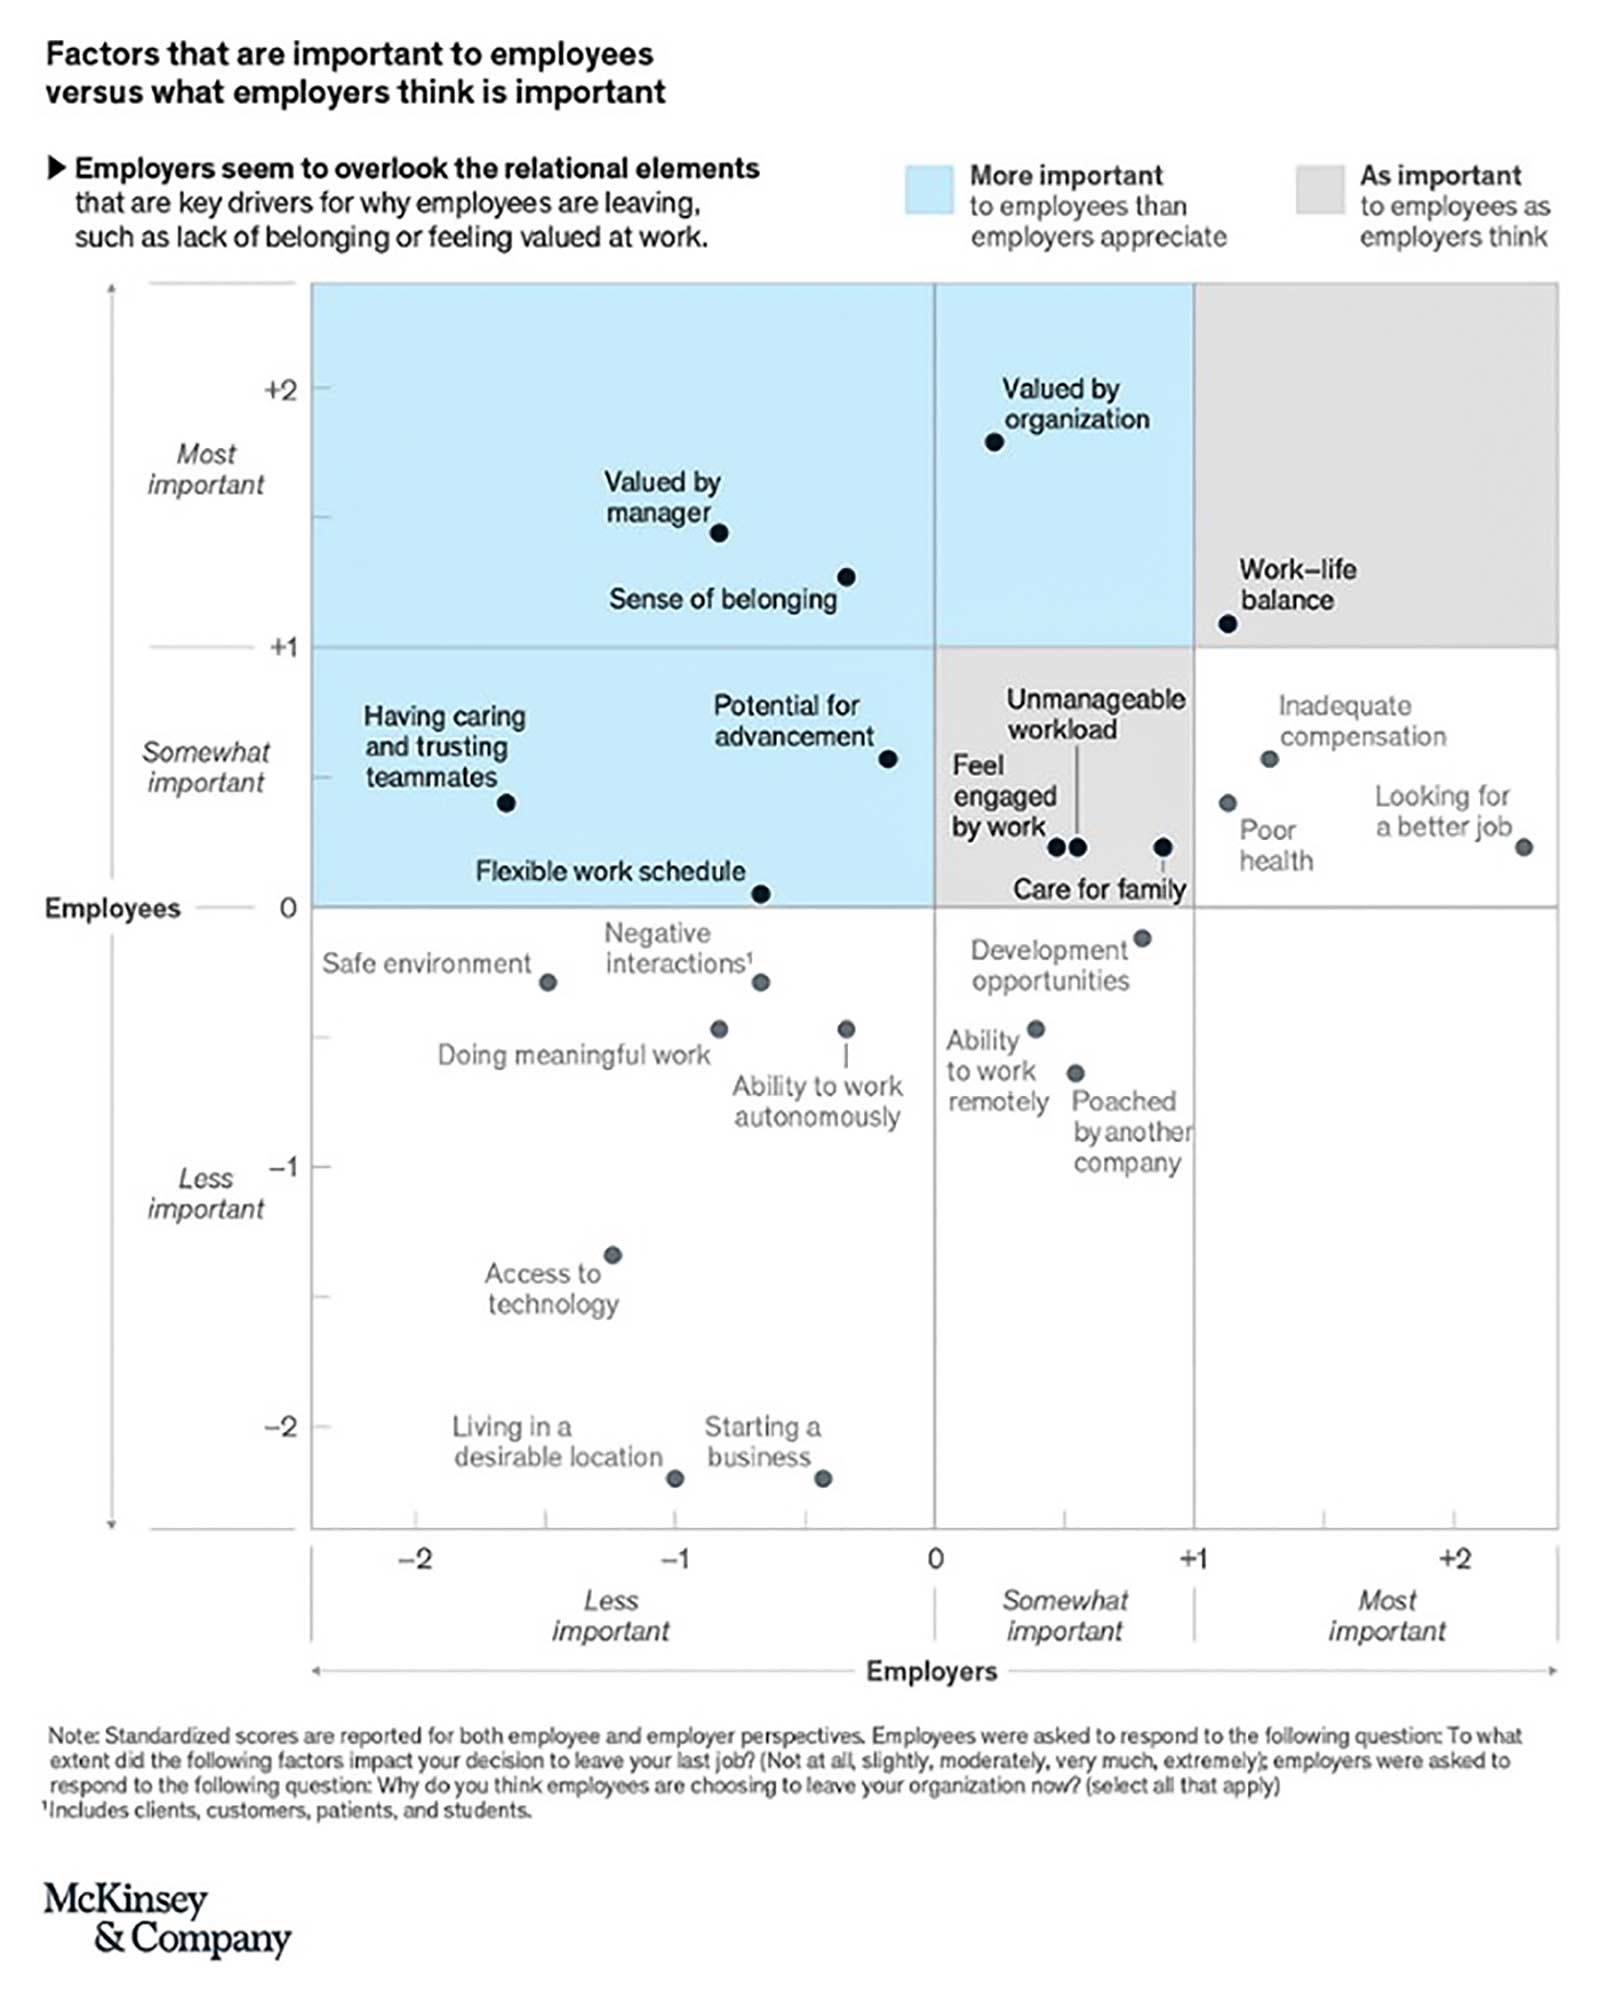 McKinsey & Company, Factors that are important to employees versus what employers think is important chart